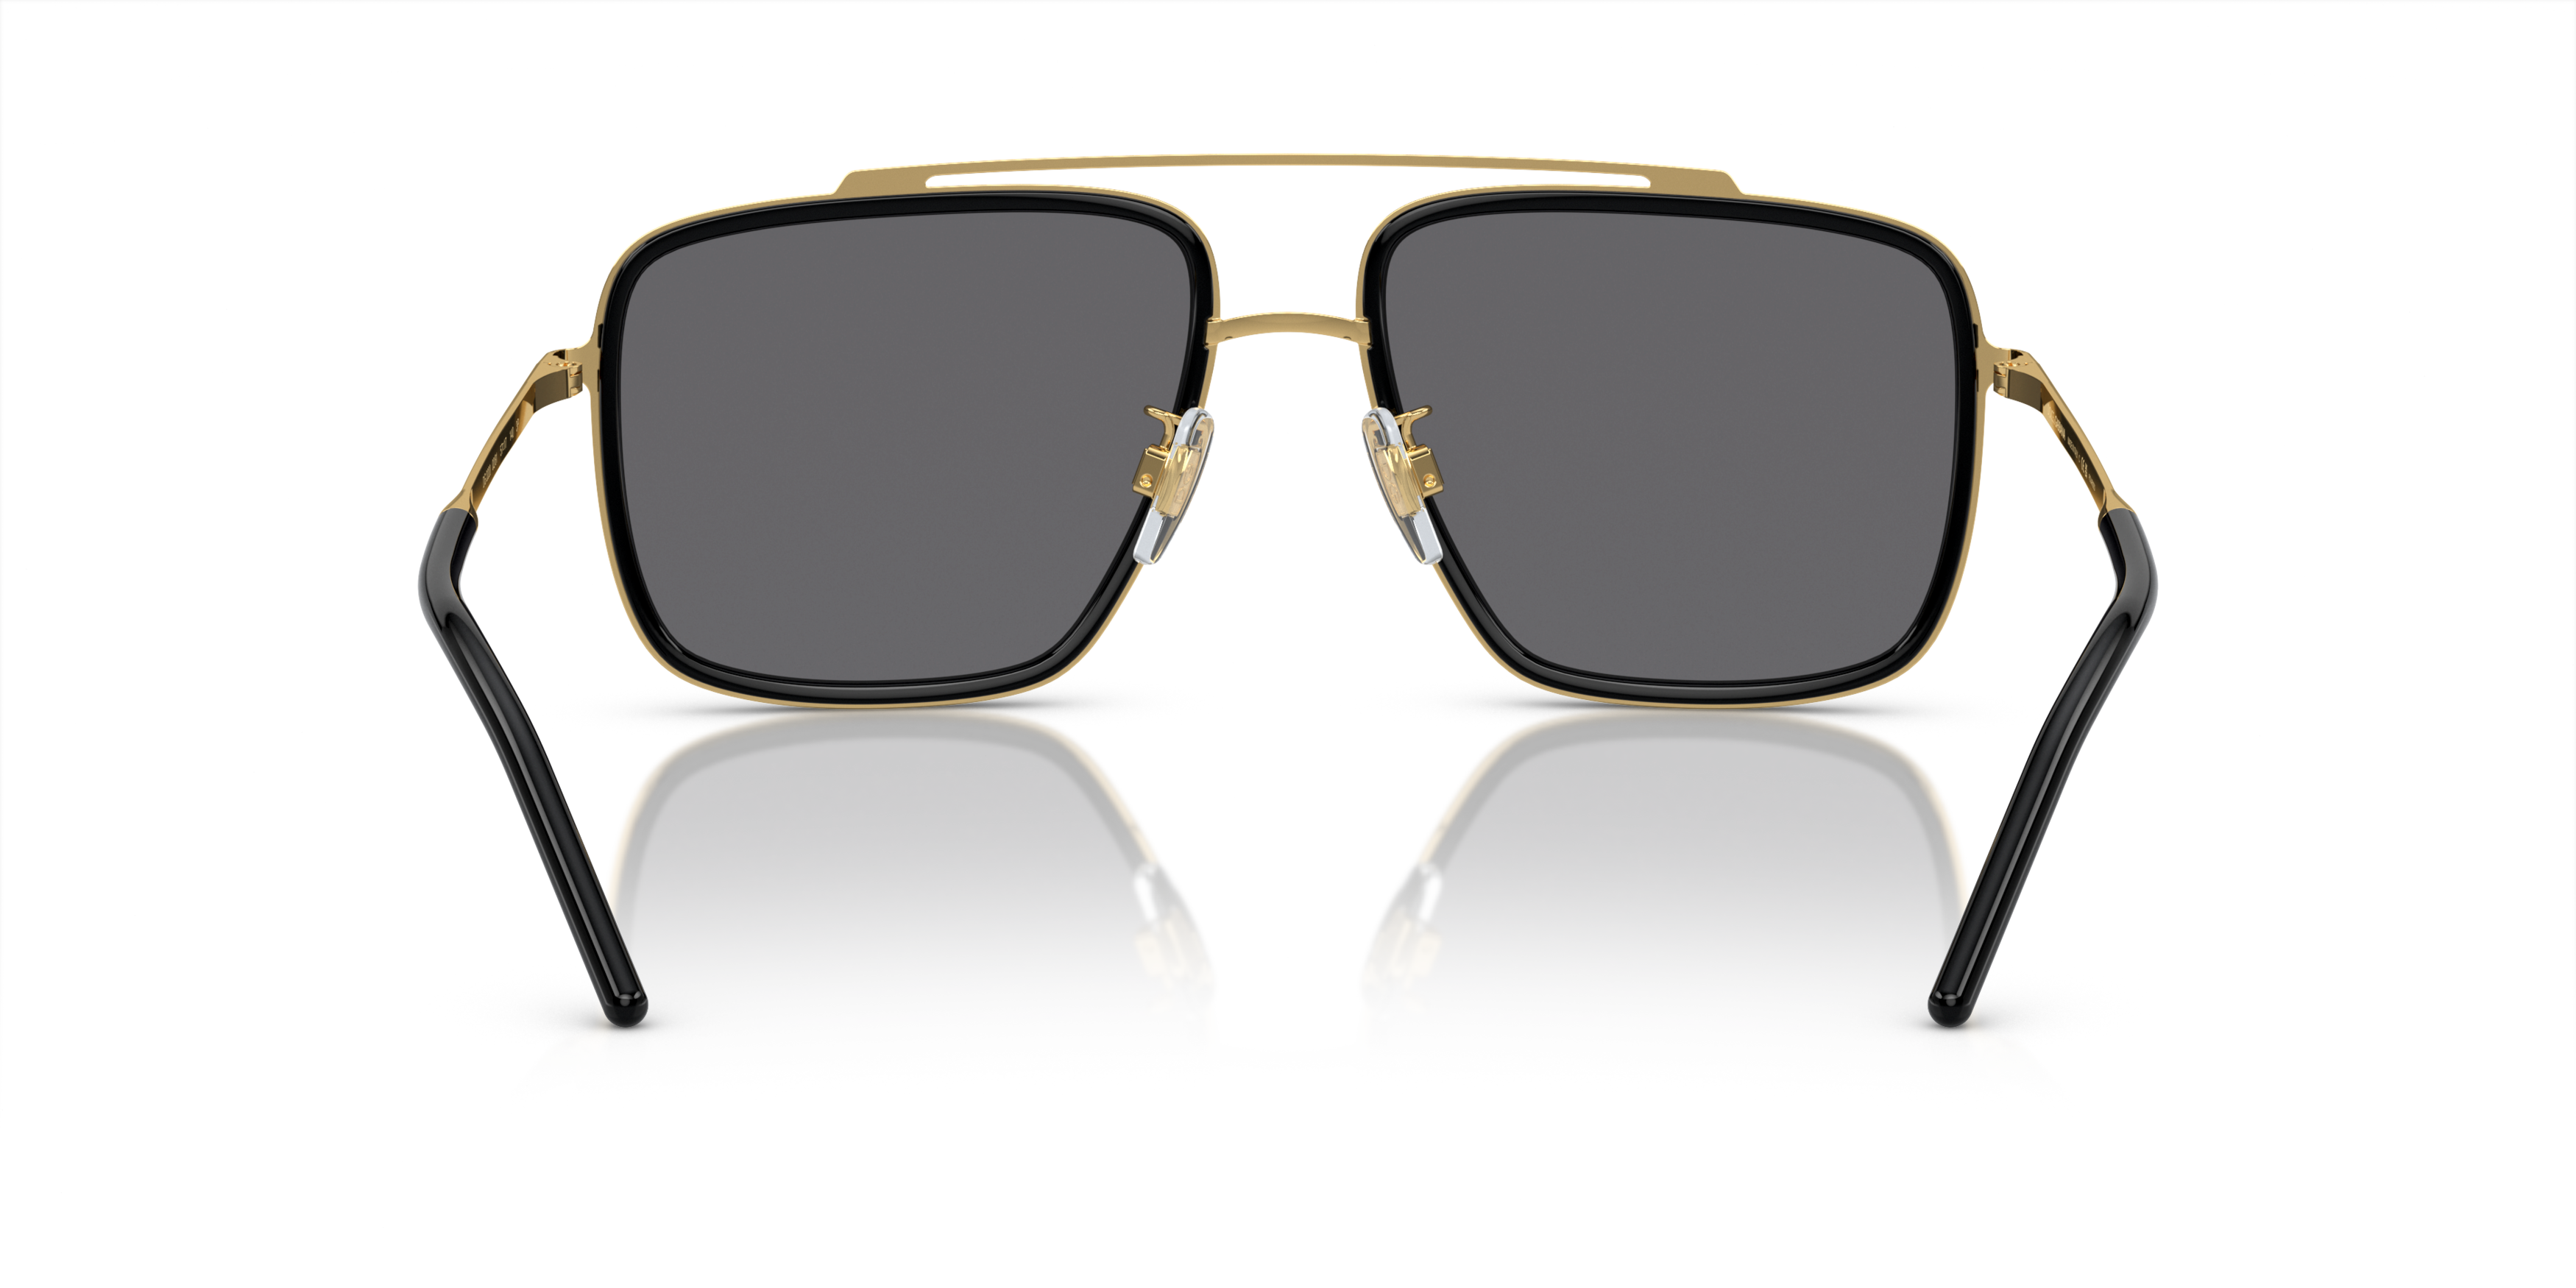 [products.image.detail02] Dolce & Gabbana DG2220 02/81